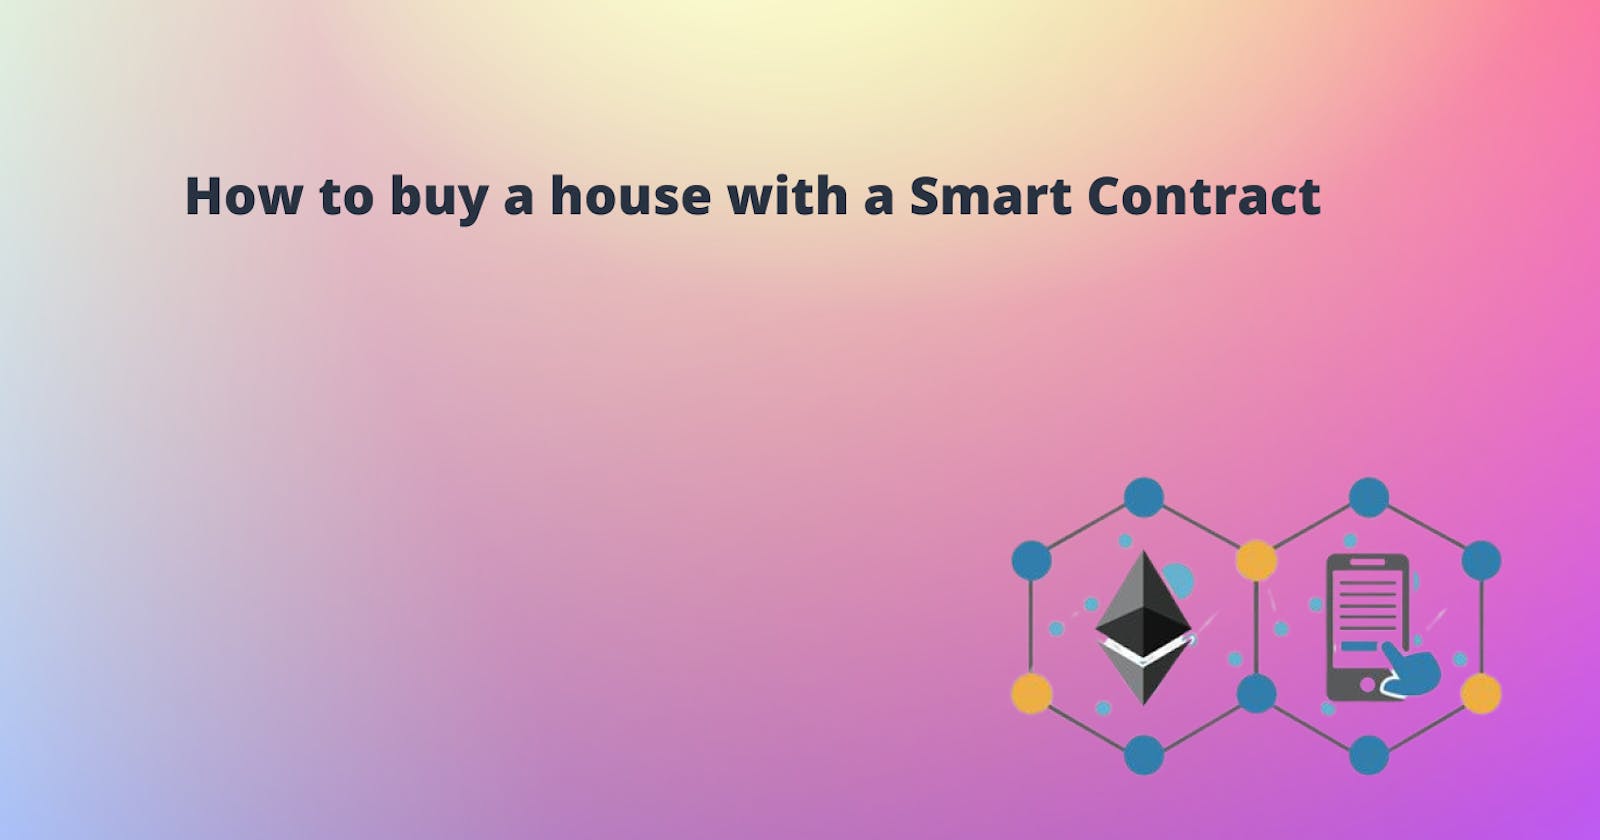 How to buy a house with a Smart Contract